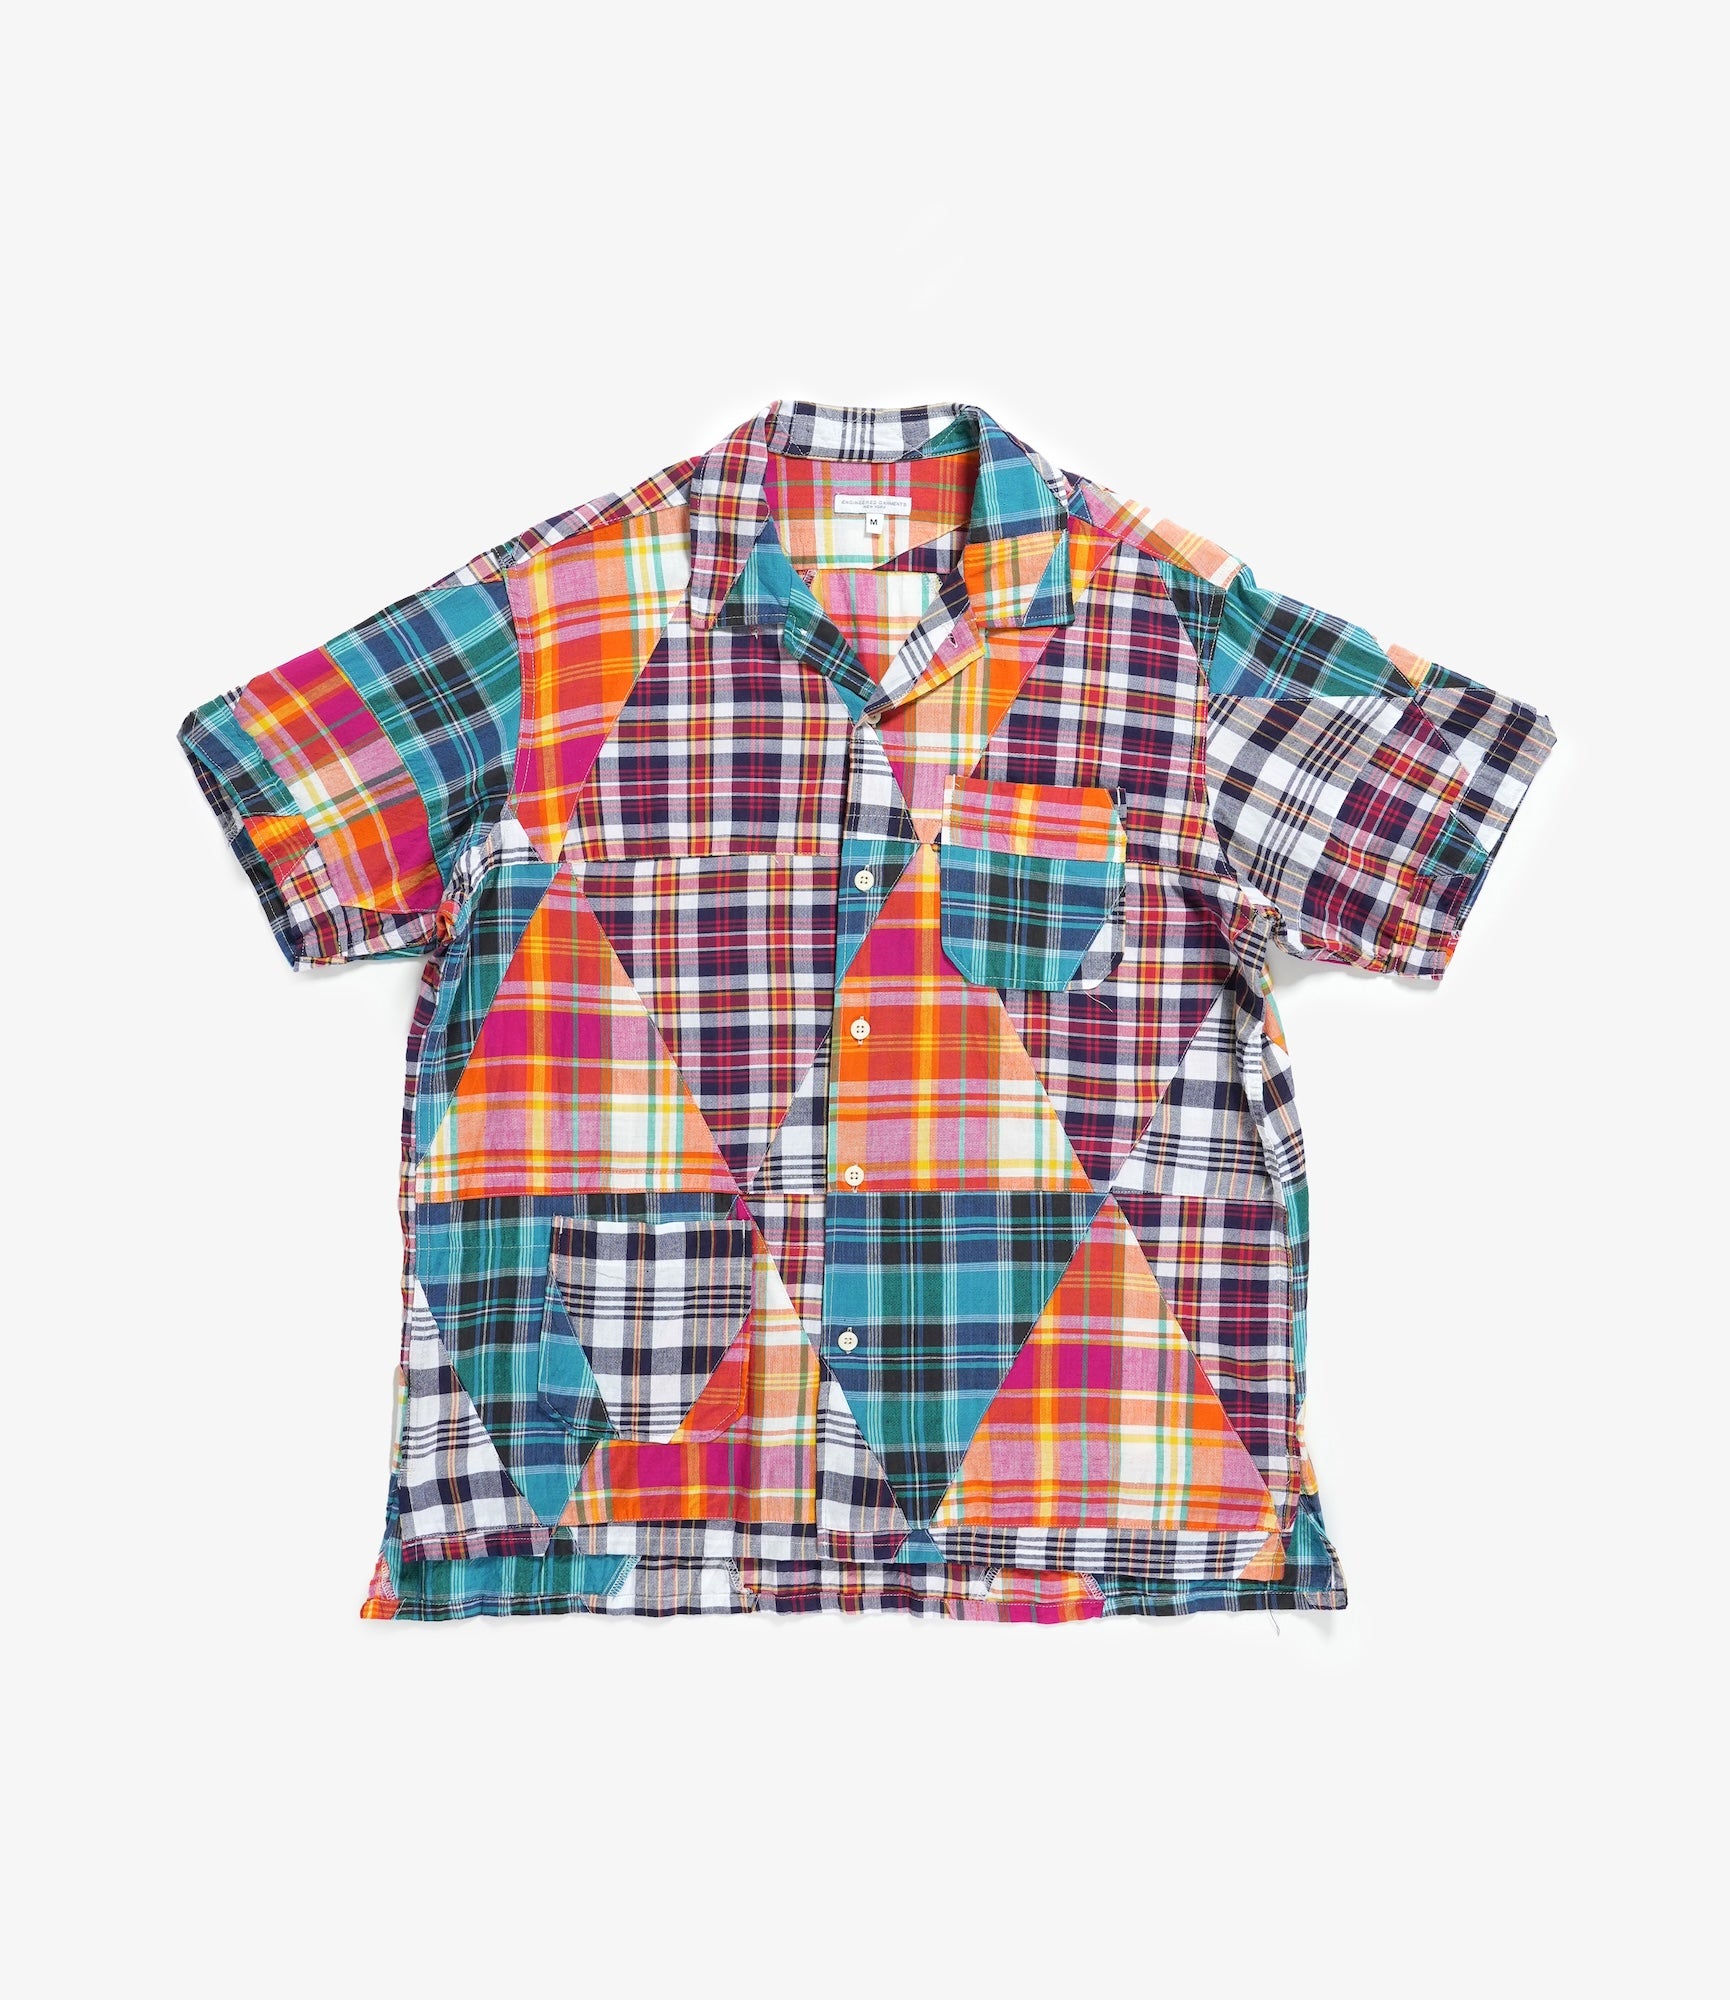 Engineered Garments Camp Shirt - Multi Color Triangle Patchwork Madras